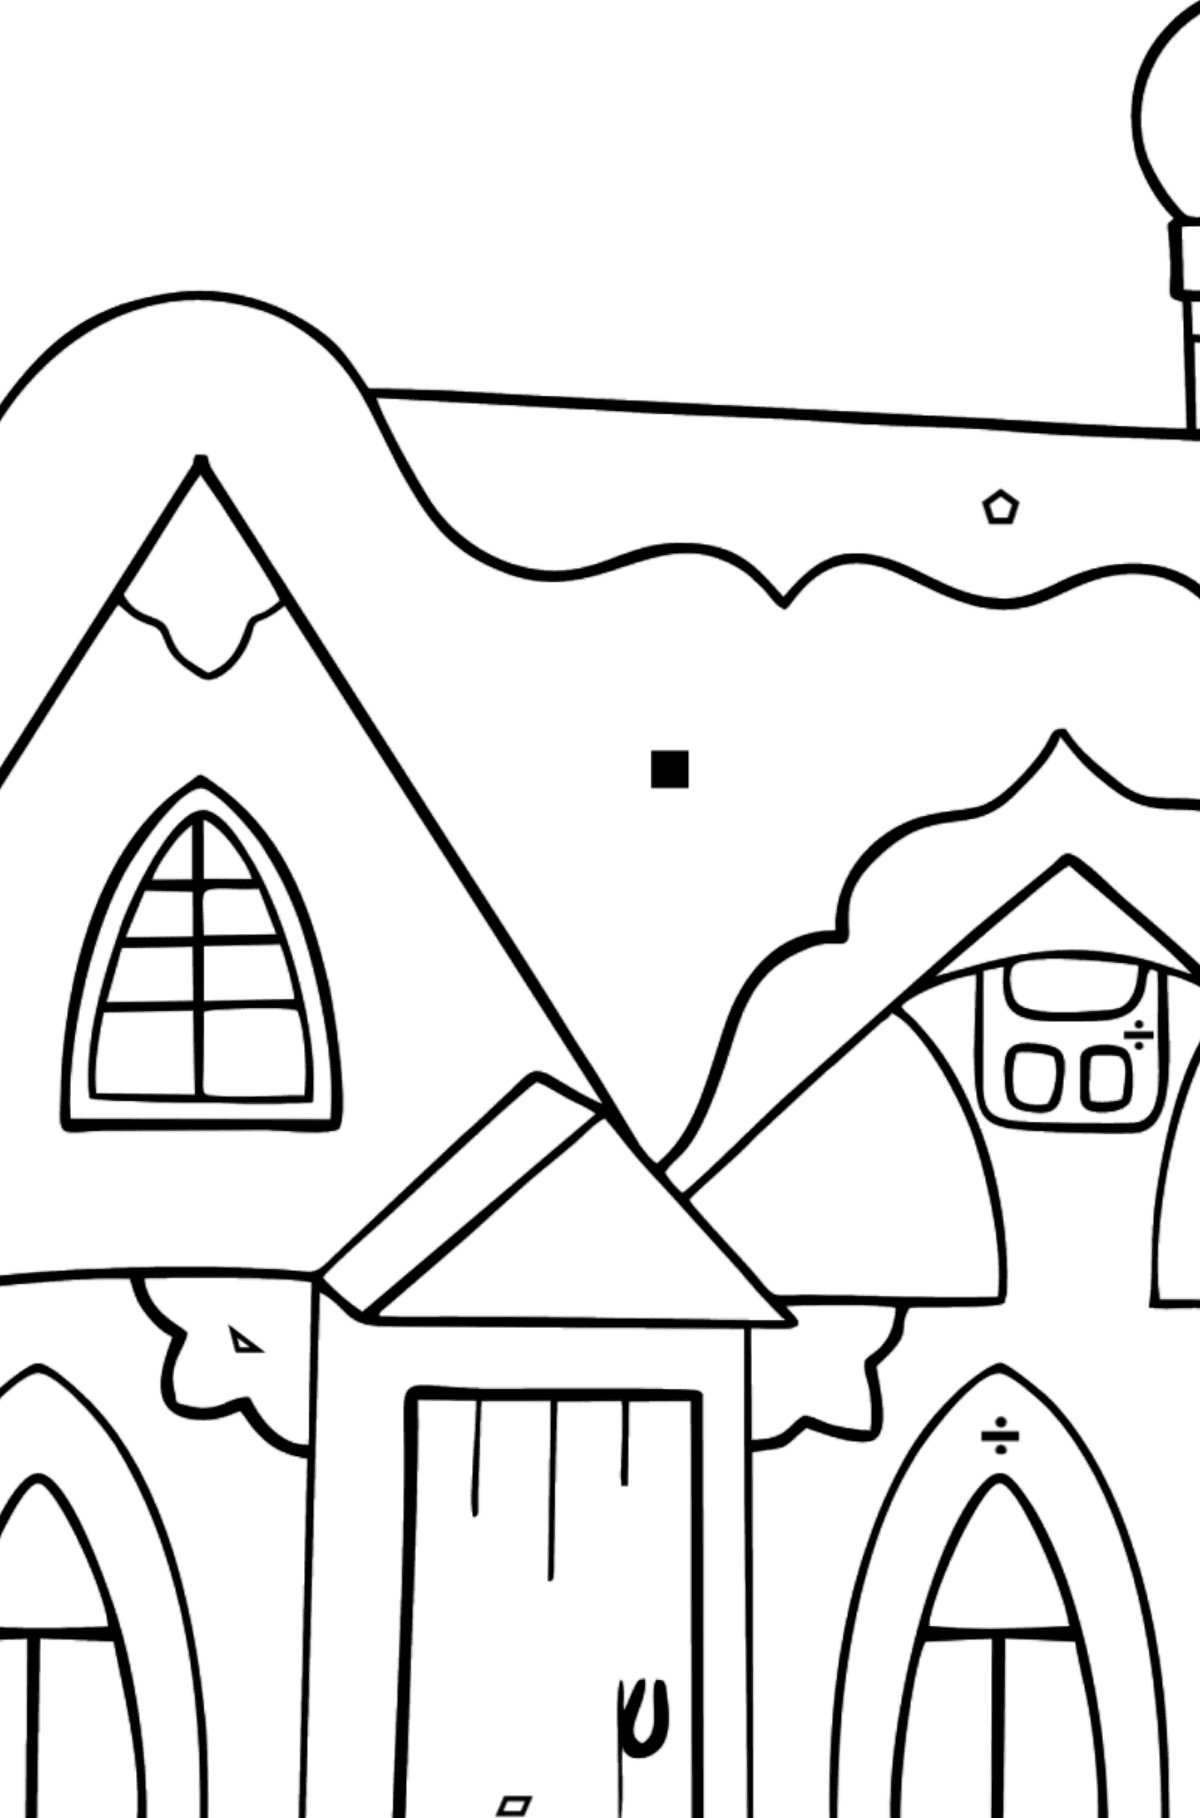 Simple Coloring Page - A Fairytale House - Coloring by Symbols and Geometric Shapes for Kids